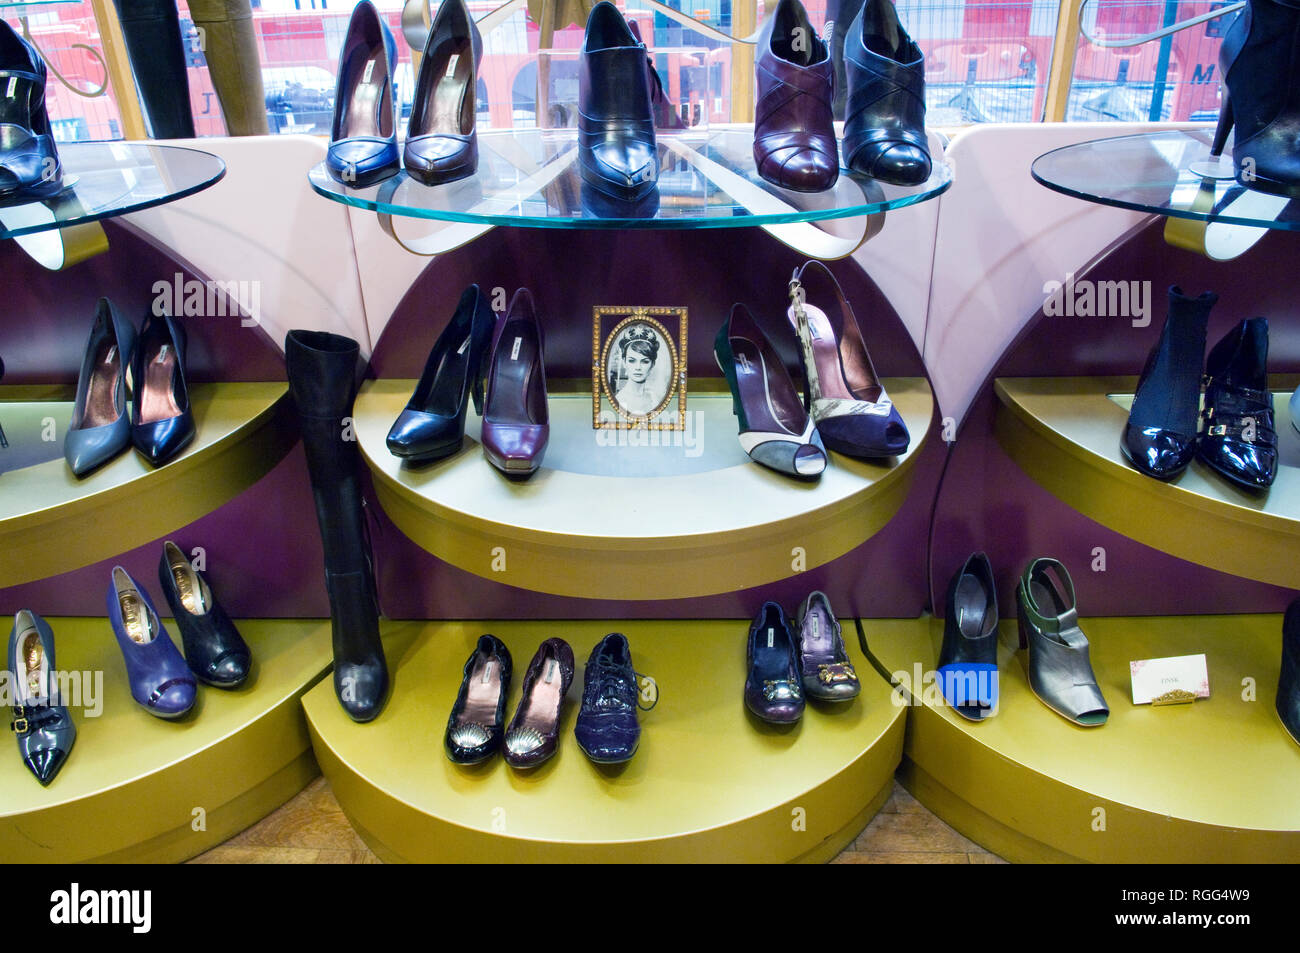 Rows of shoes at Poste Mistress, London, shoe shop with a picture of Audrey Hepburn in the middle Stock Photo